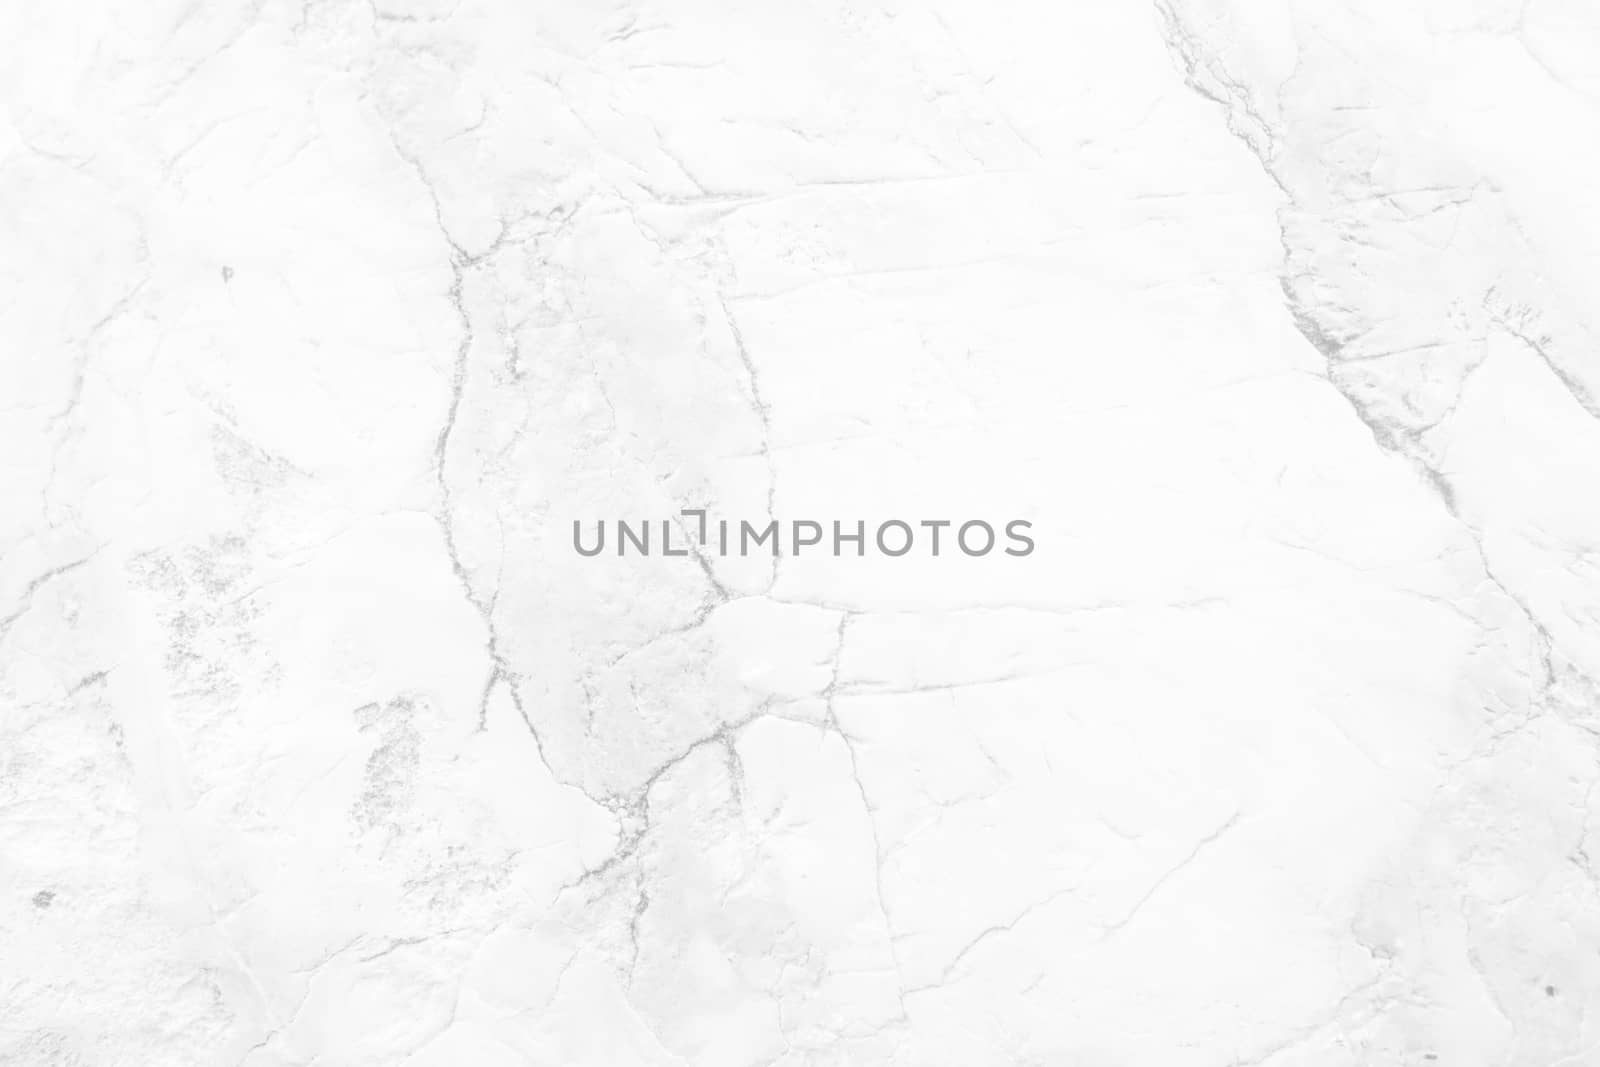 White Marble Wall Textue Background.